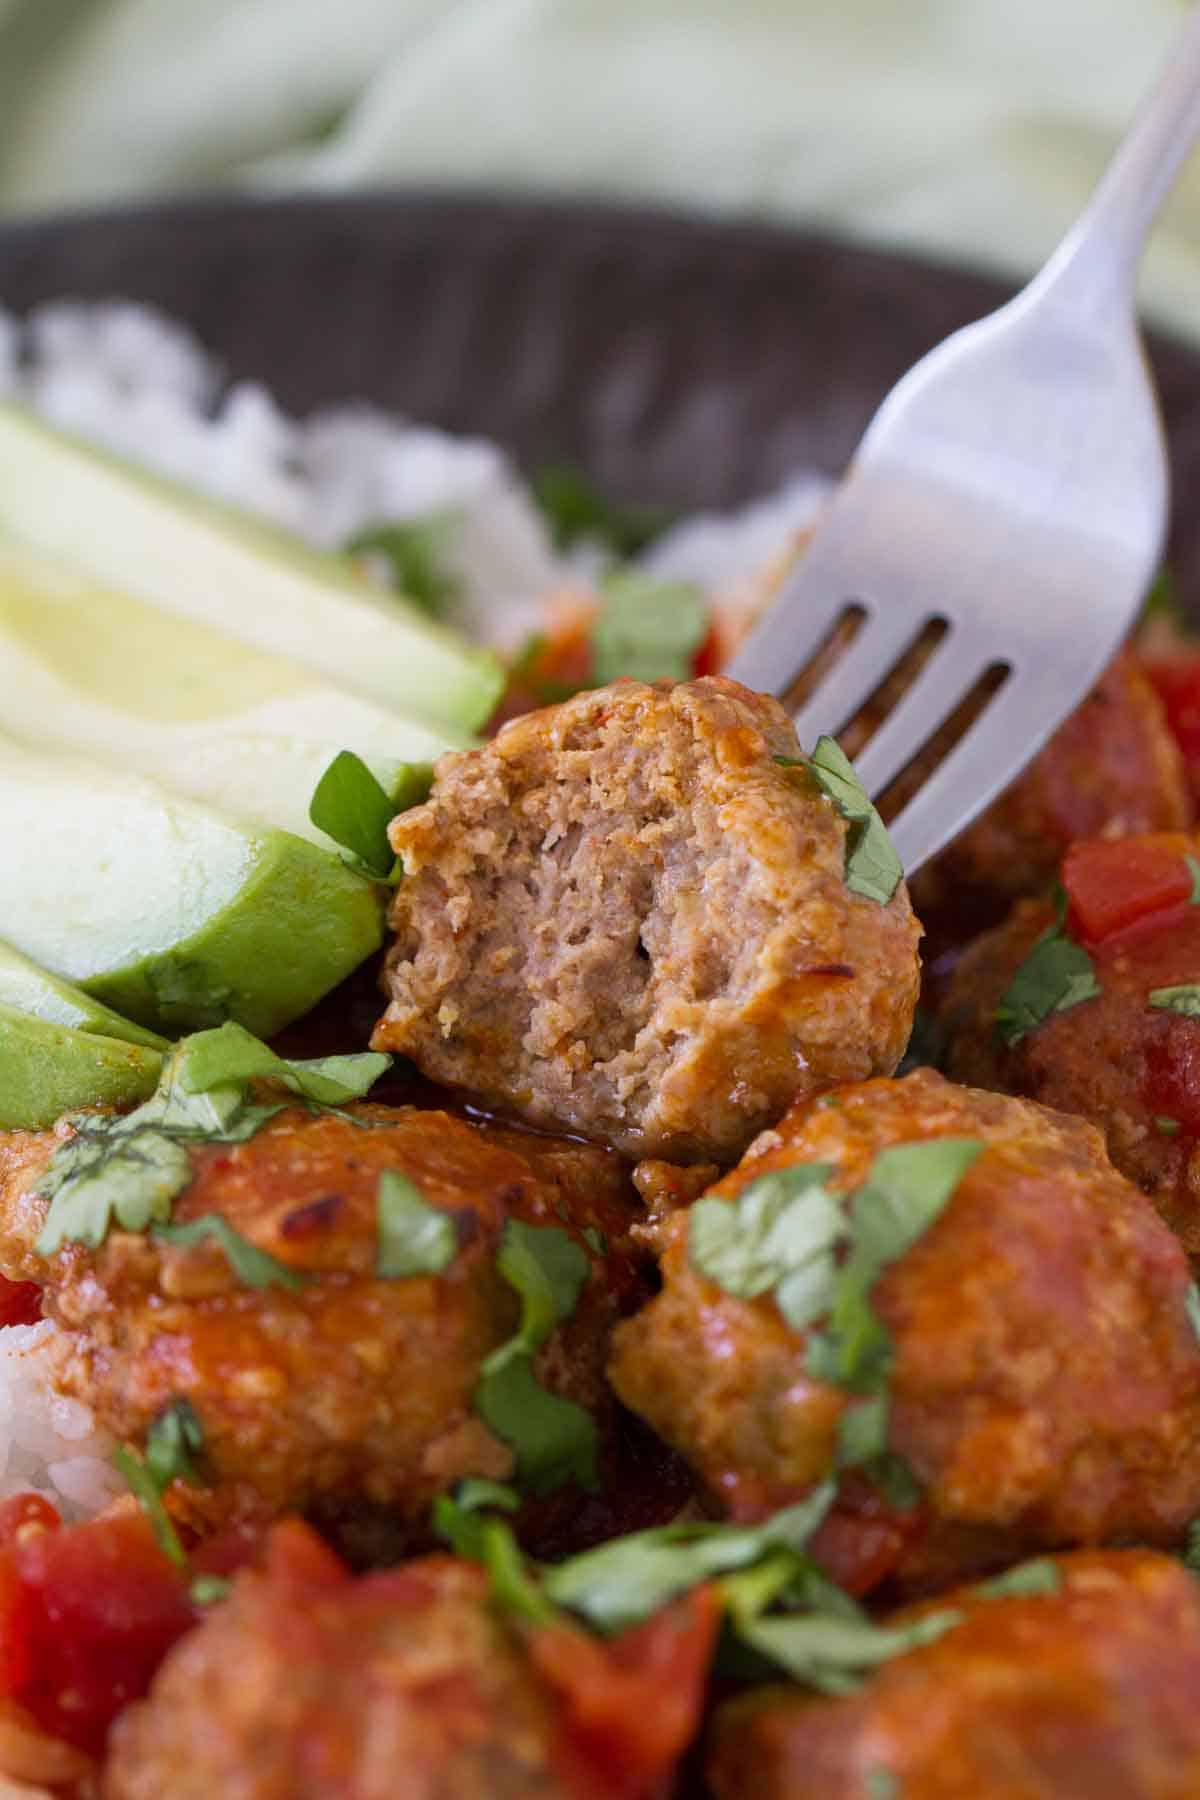 Slow Cooker Mexican Meatball with a bite taken from it to show texture.